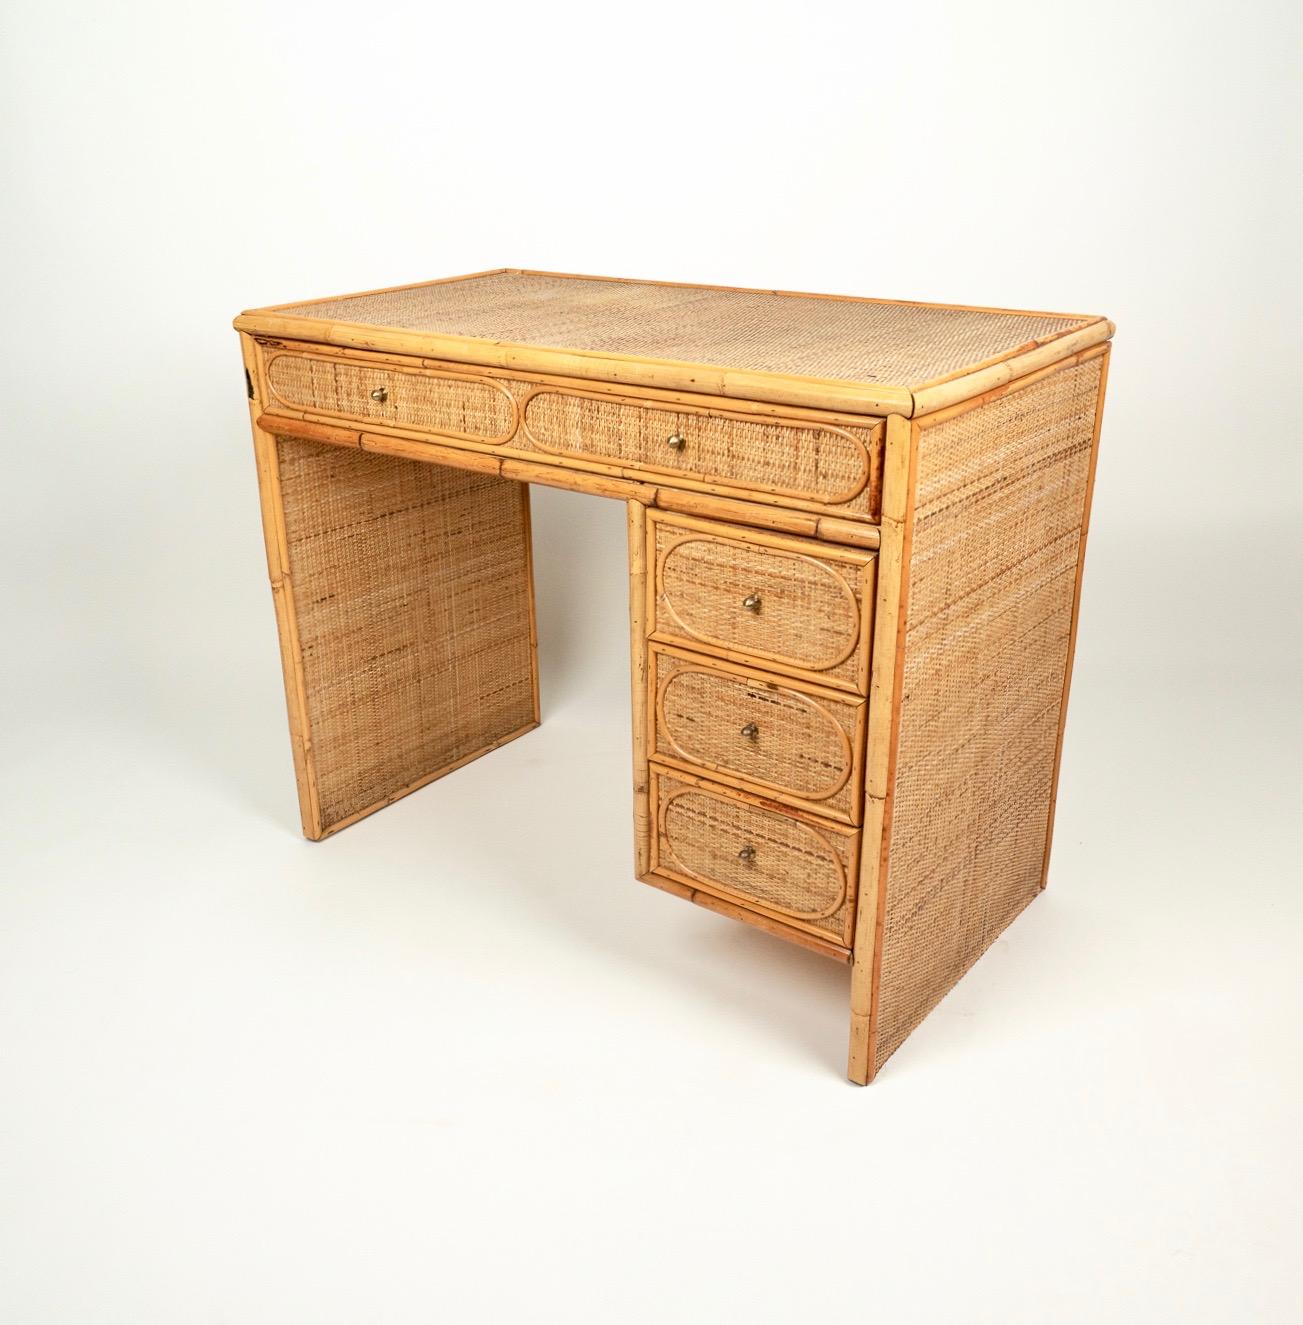 Writing table / desk in rattan, bamboo and wood featuring four drawers.

Made in Italy in the 1970s.